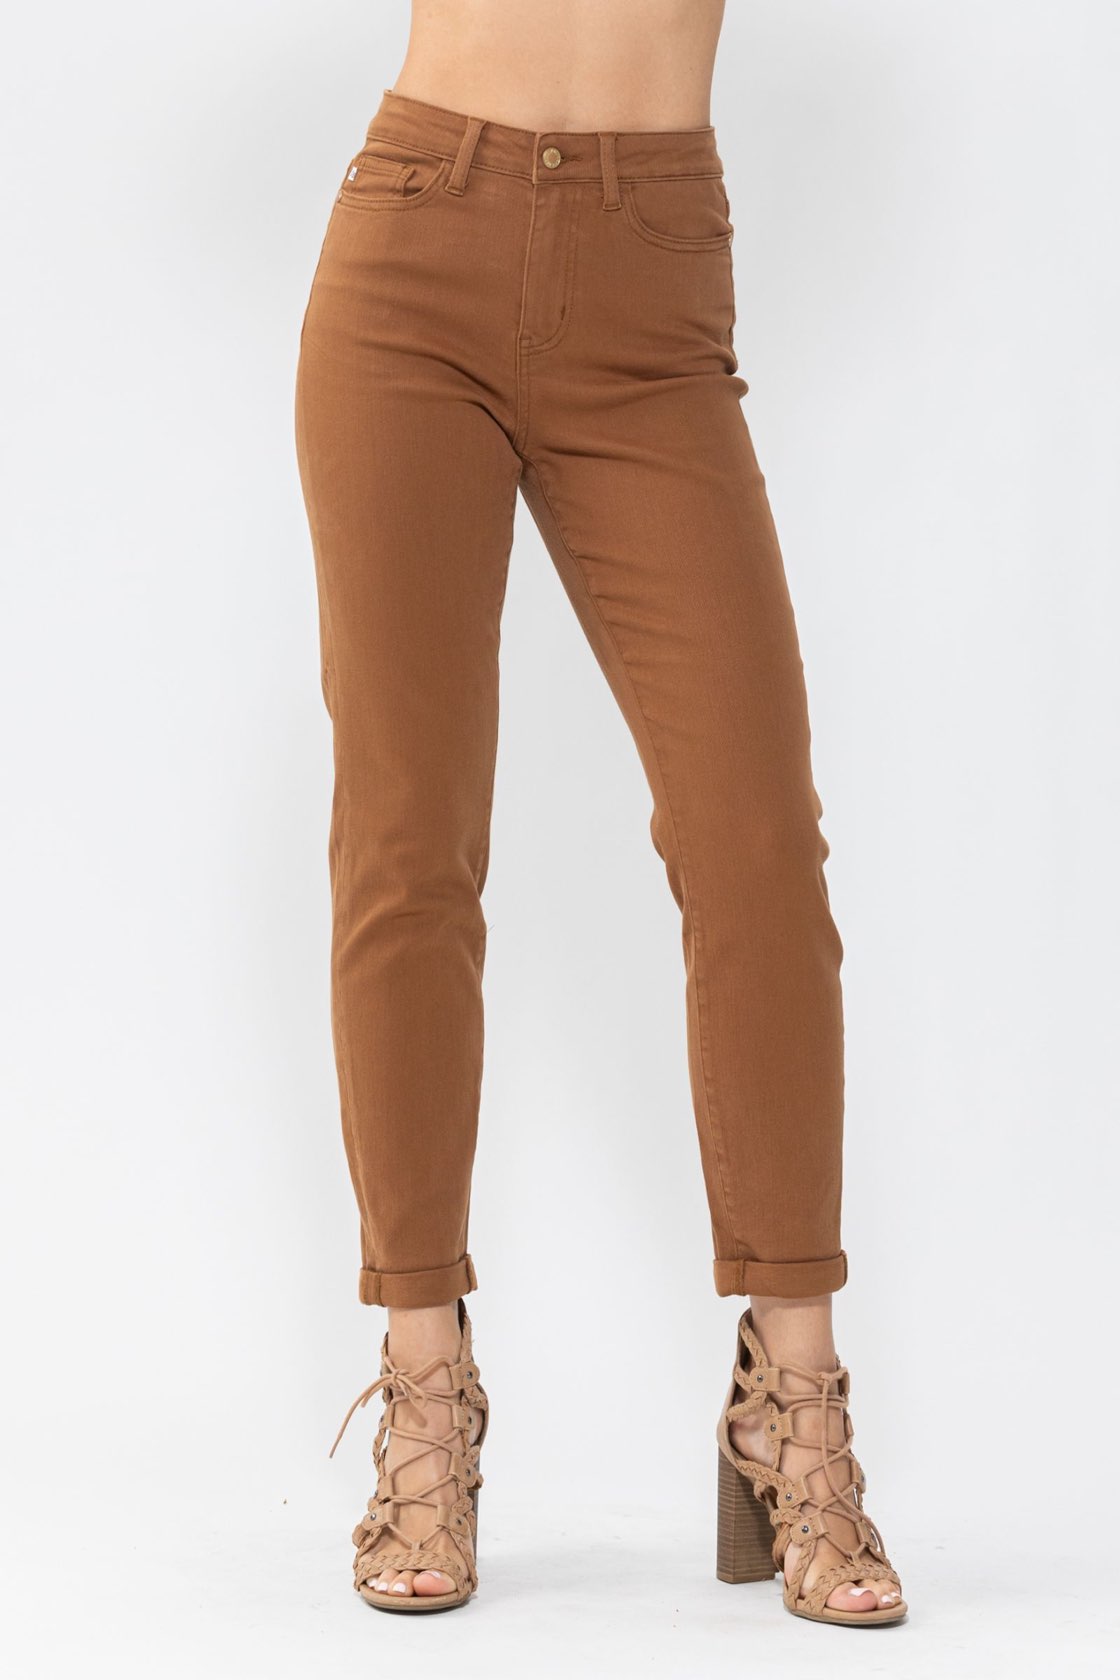 Calling Fall Brown Judy Blue Jeans